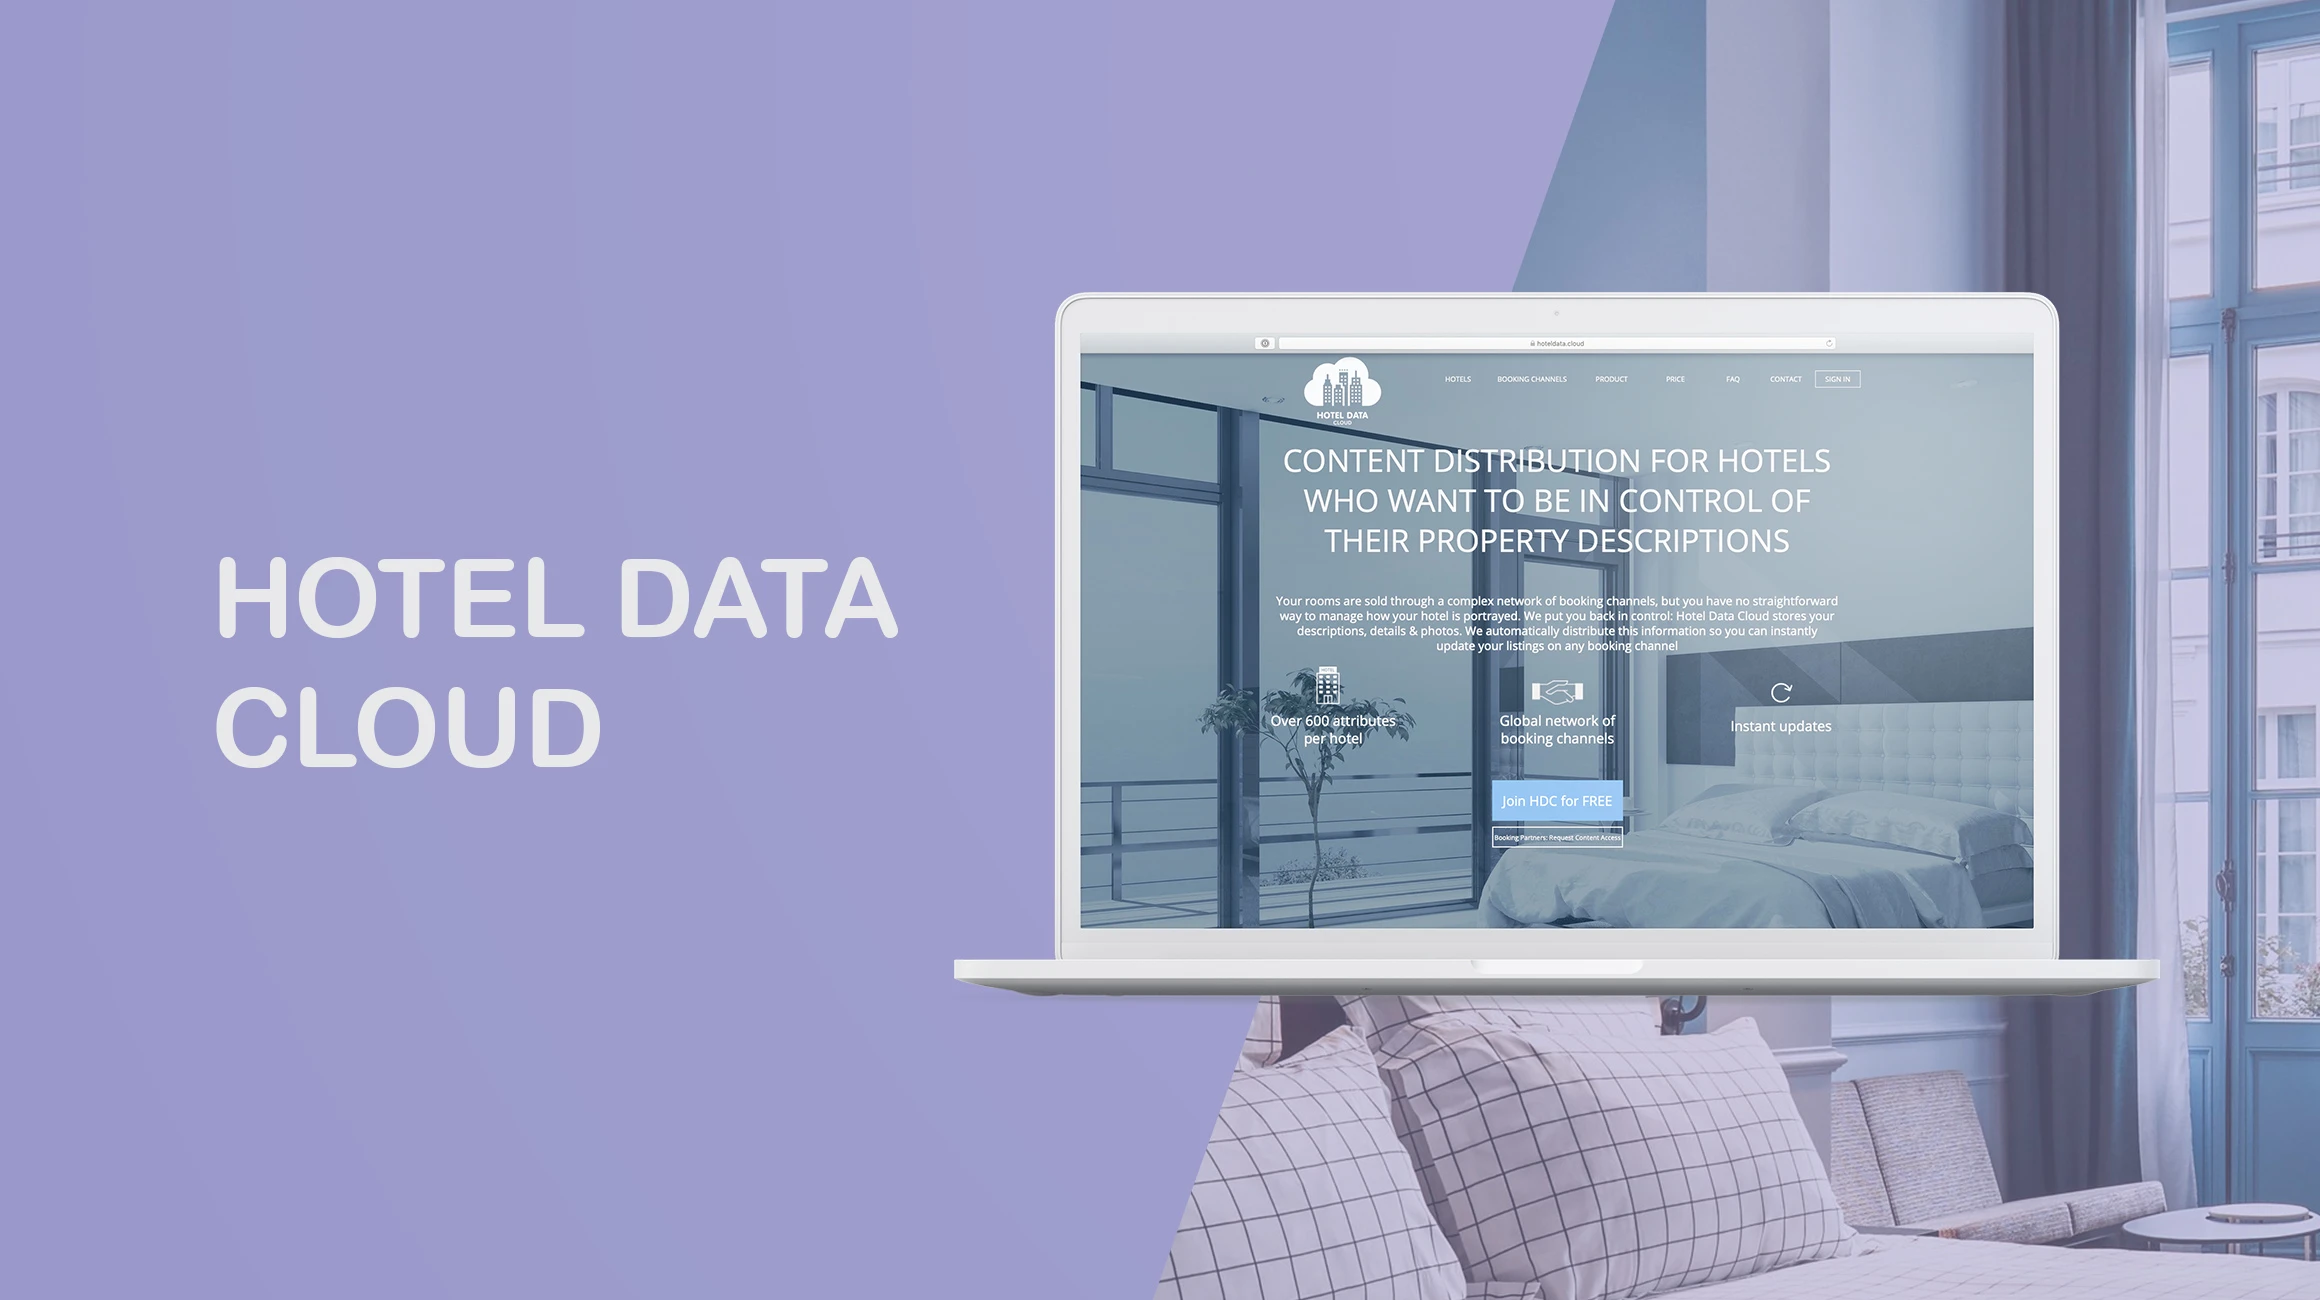 hotel-data-cloud-an-easy-way-to-manage-information-about-hotel-properties